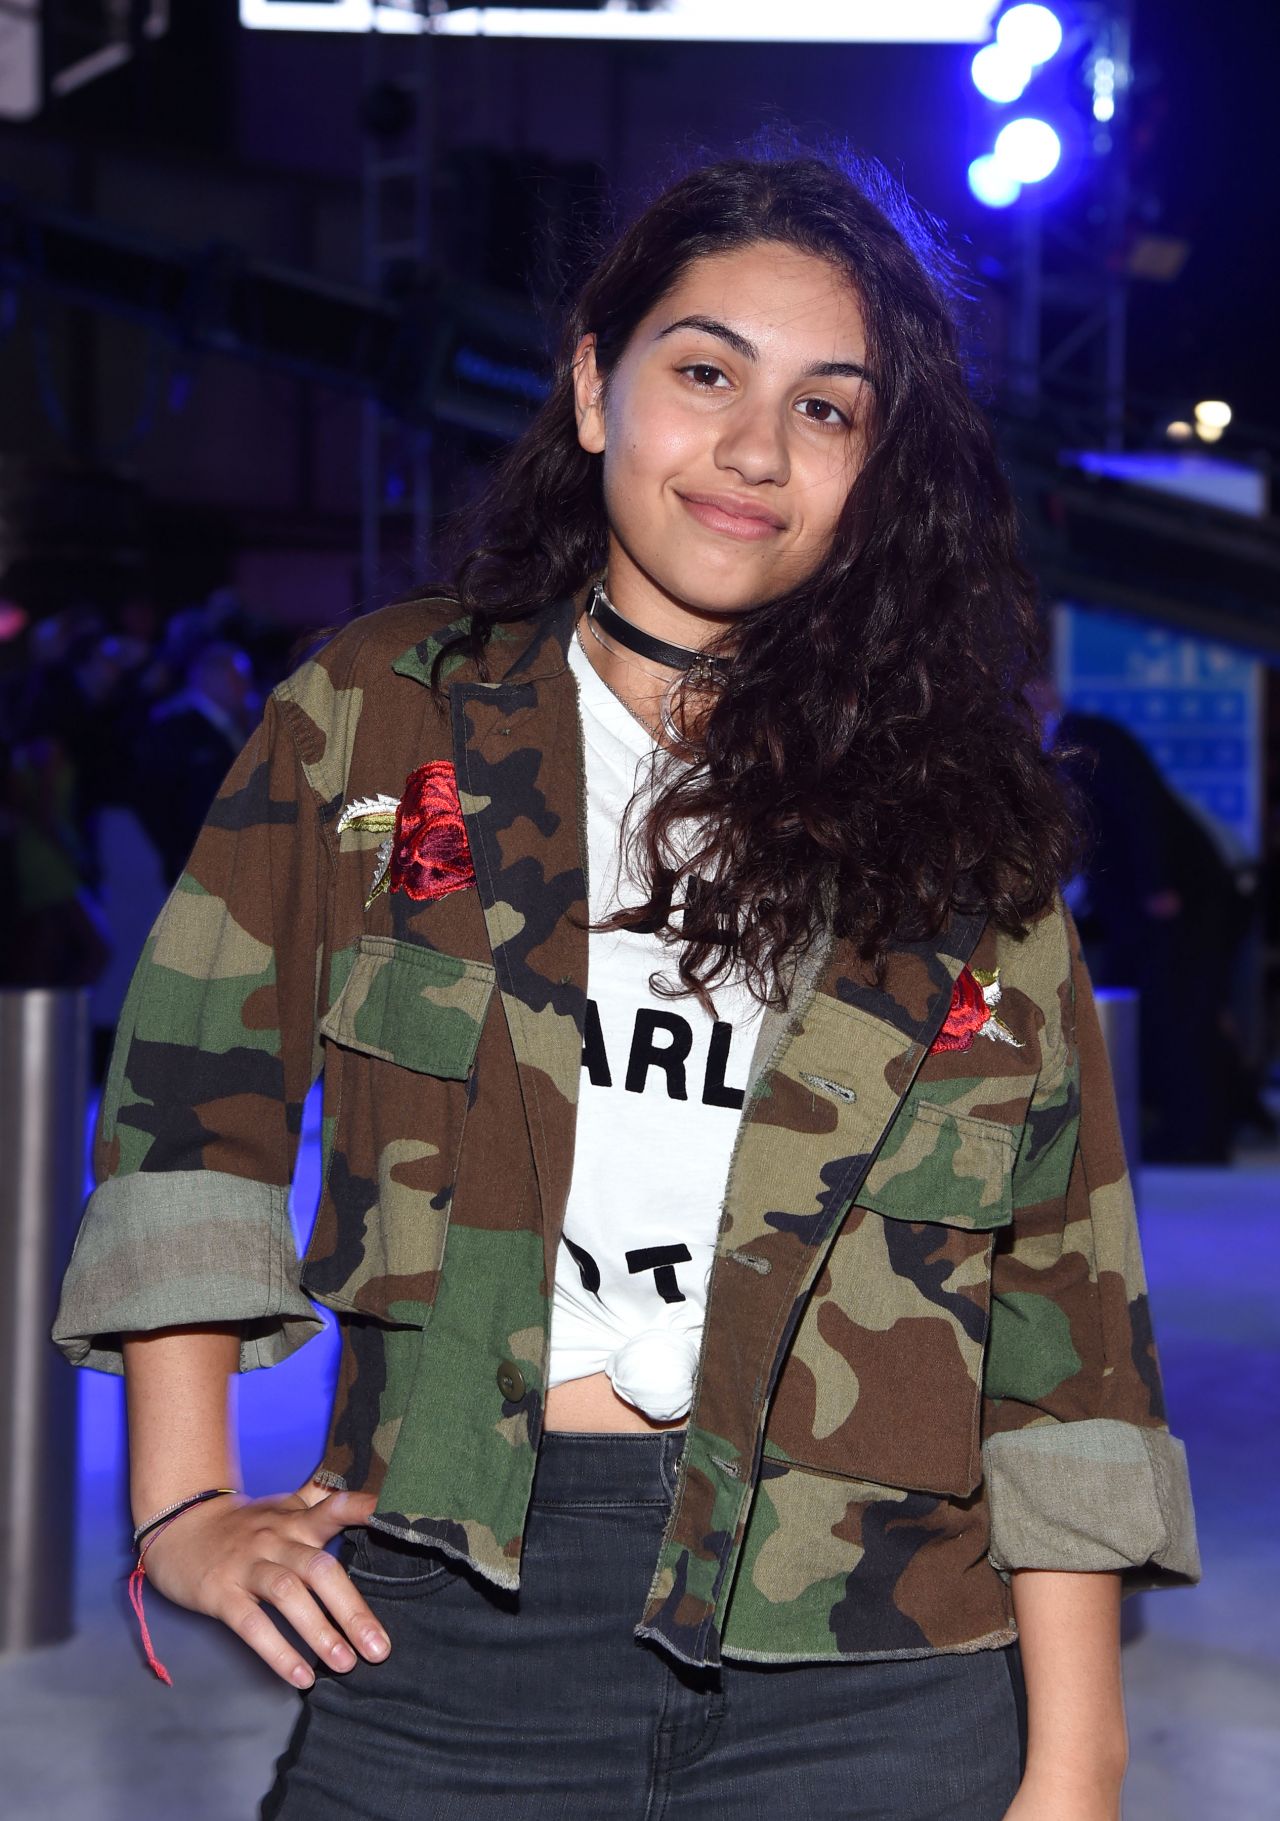 Alessia Cara – MTV Video Music Awards 2016 in New York City 8/28/20161280 x 1821